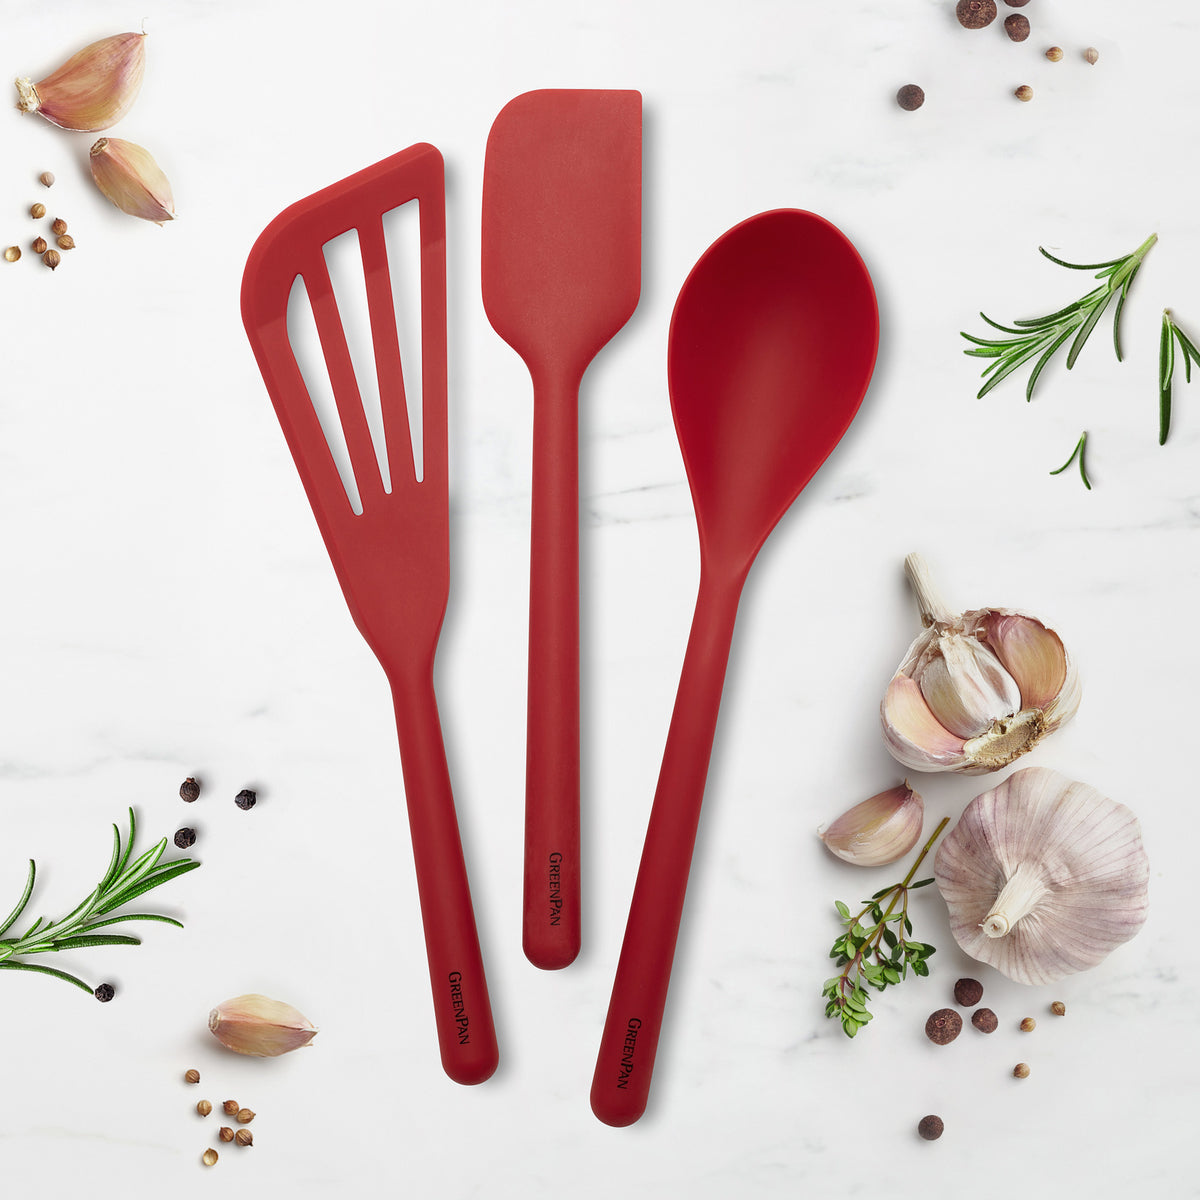 Healthy Non-Toxic PFAS Free Cookware - Platinum Silicone Tools 3-Piece Utensil Set | Red by GreenPan